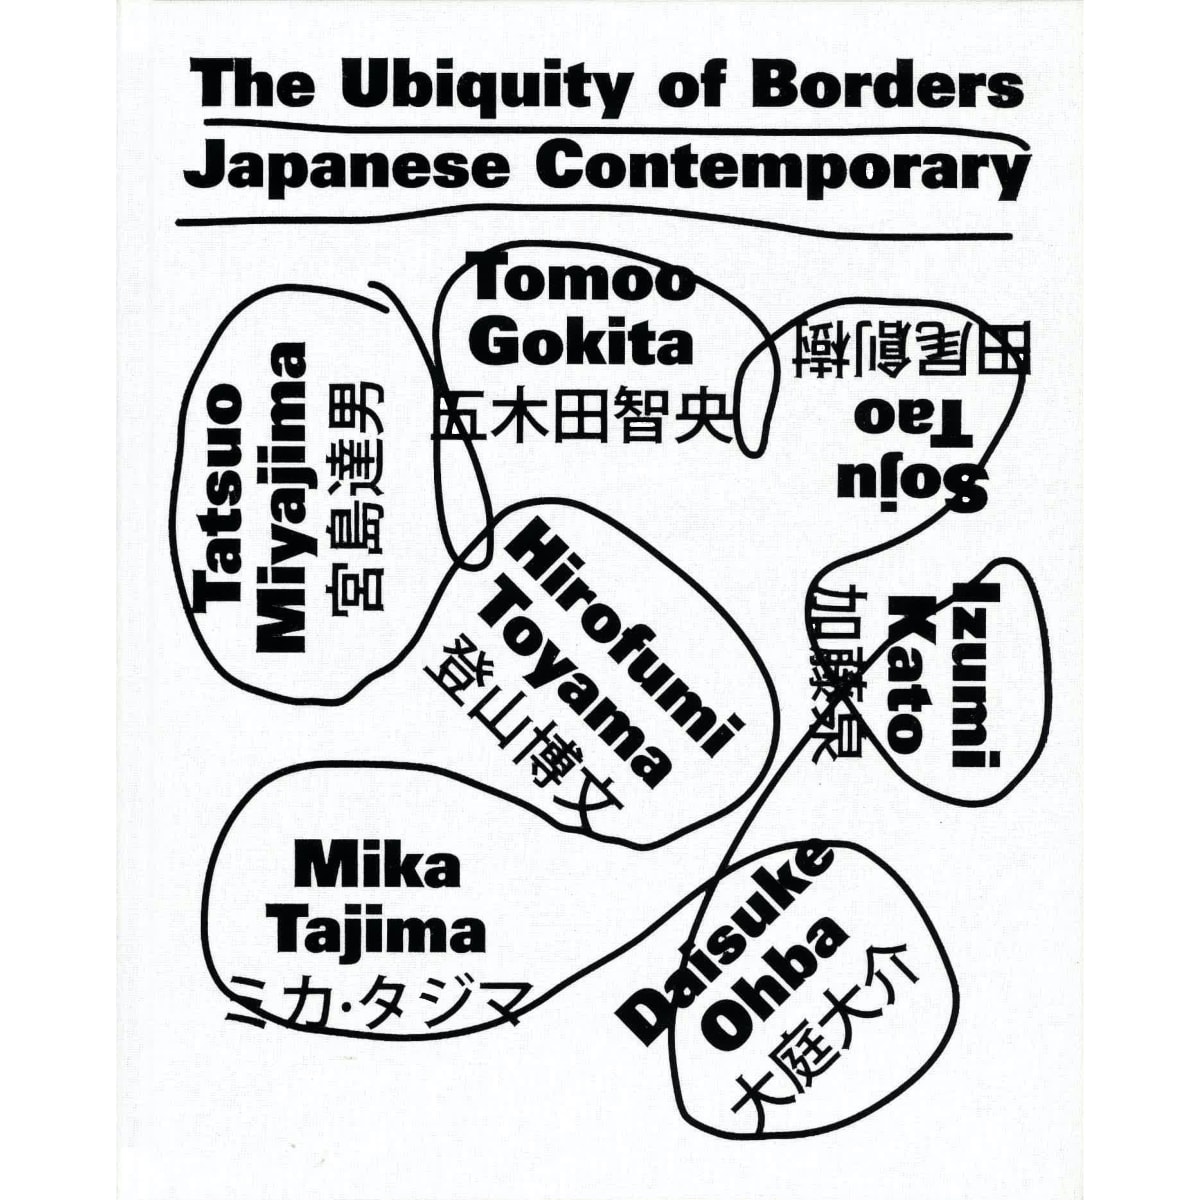 The Ubiquity of Borders: Japanese Contemporary